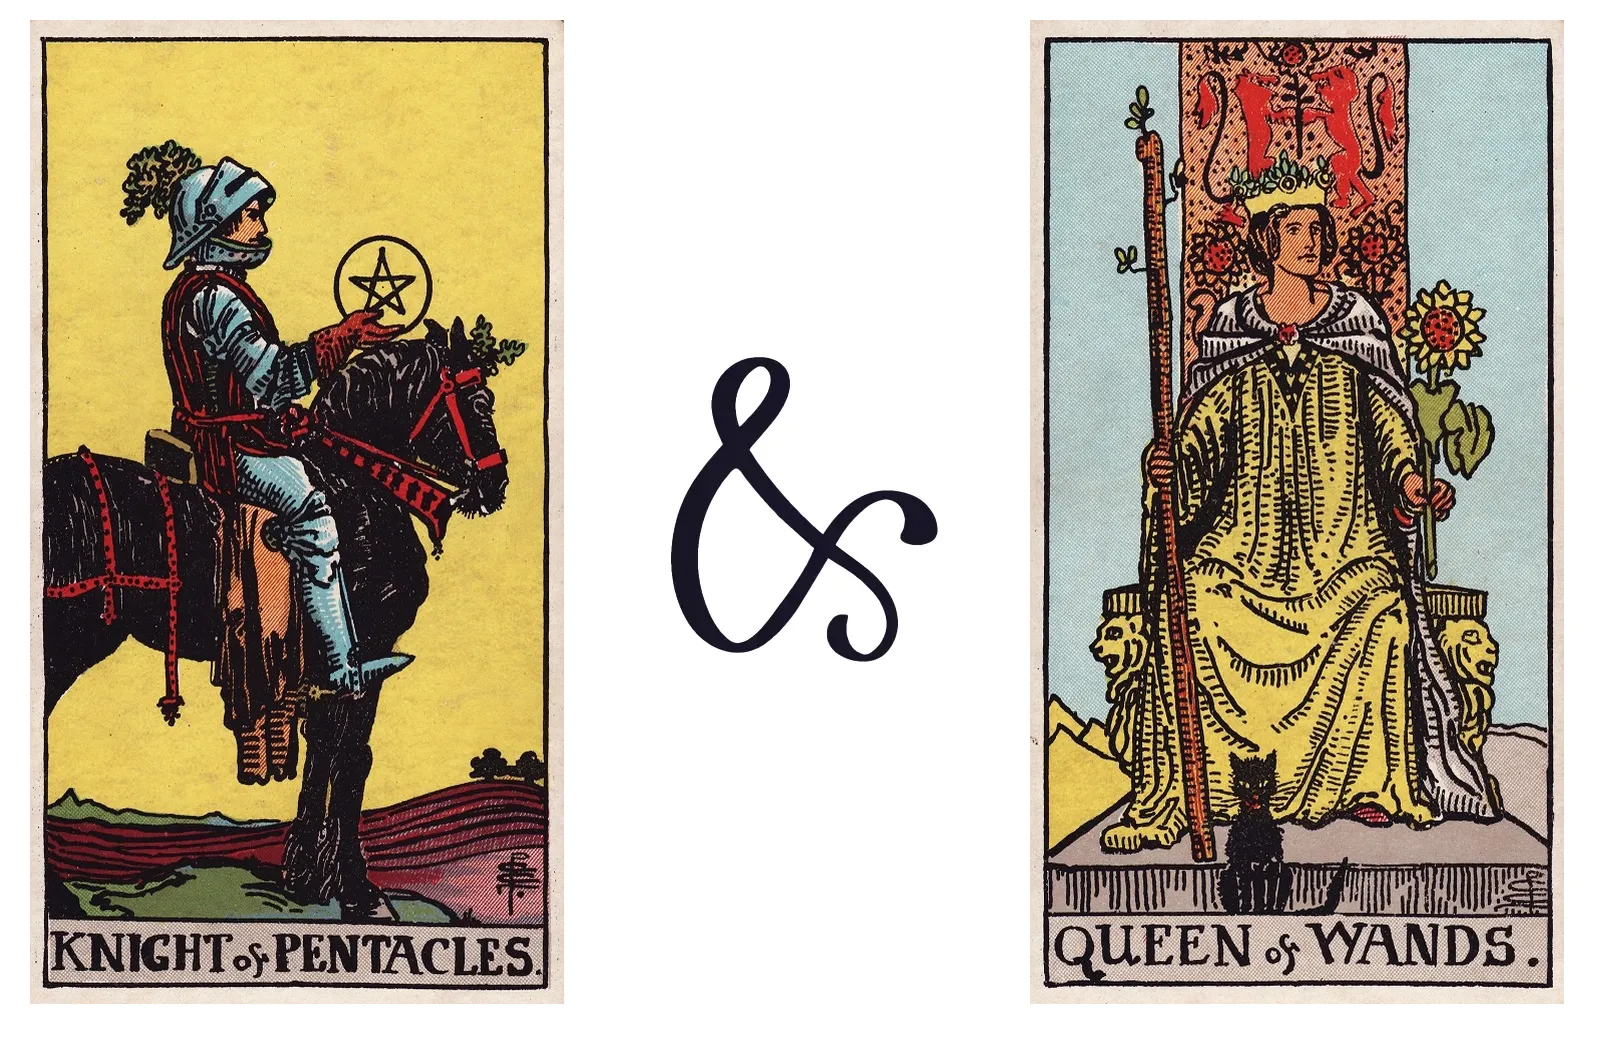 Knight of Pentacles and Queen of Wands